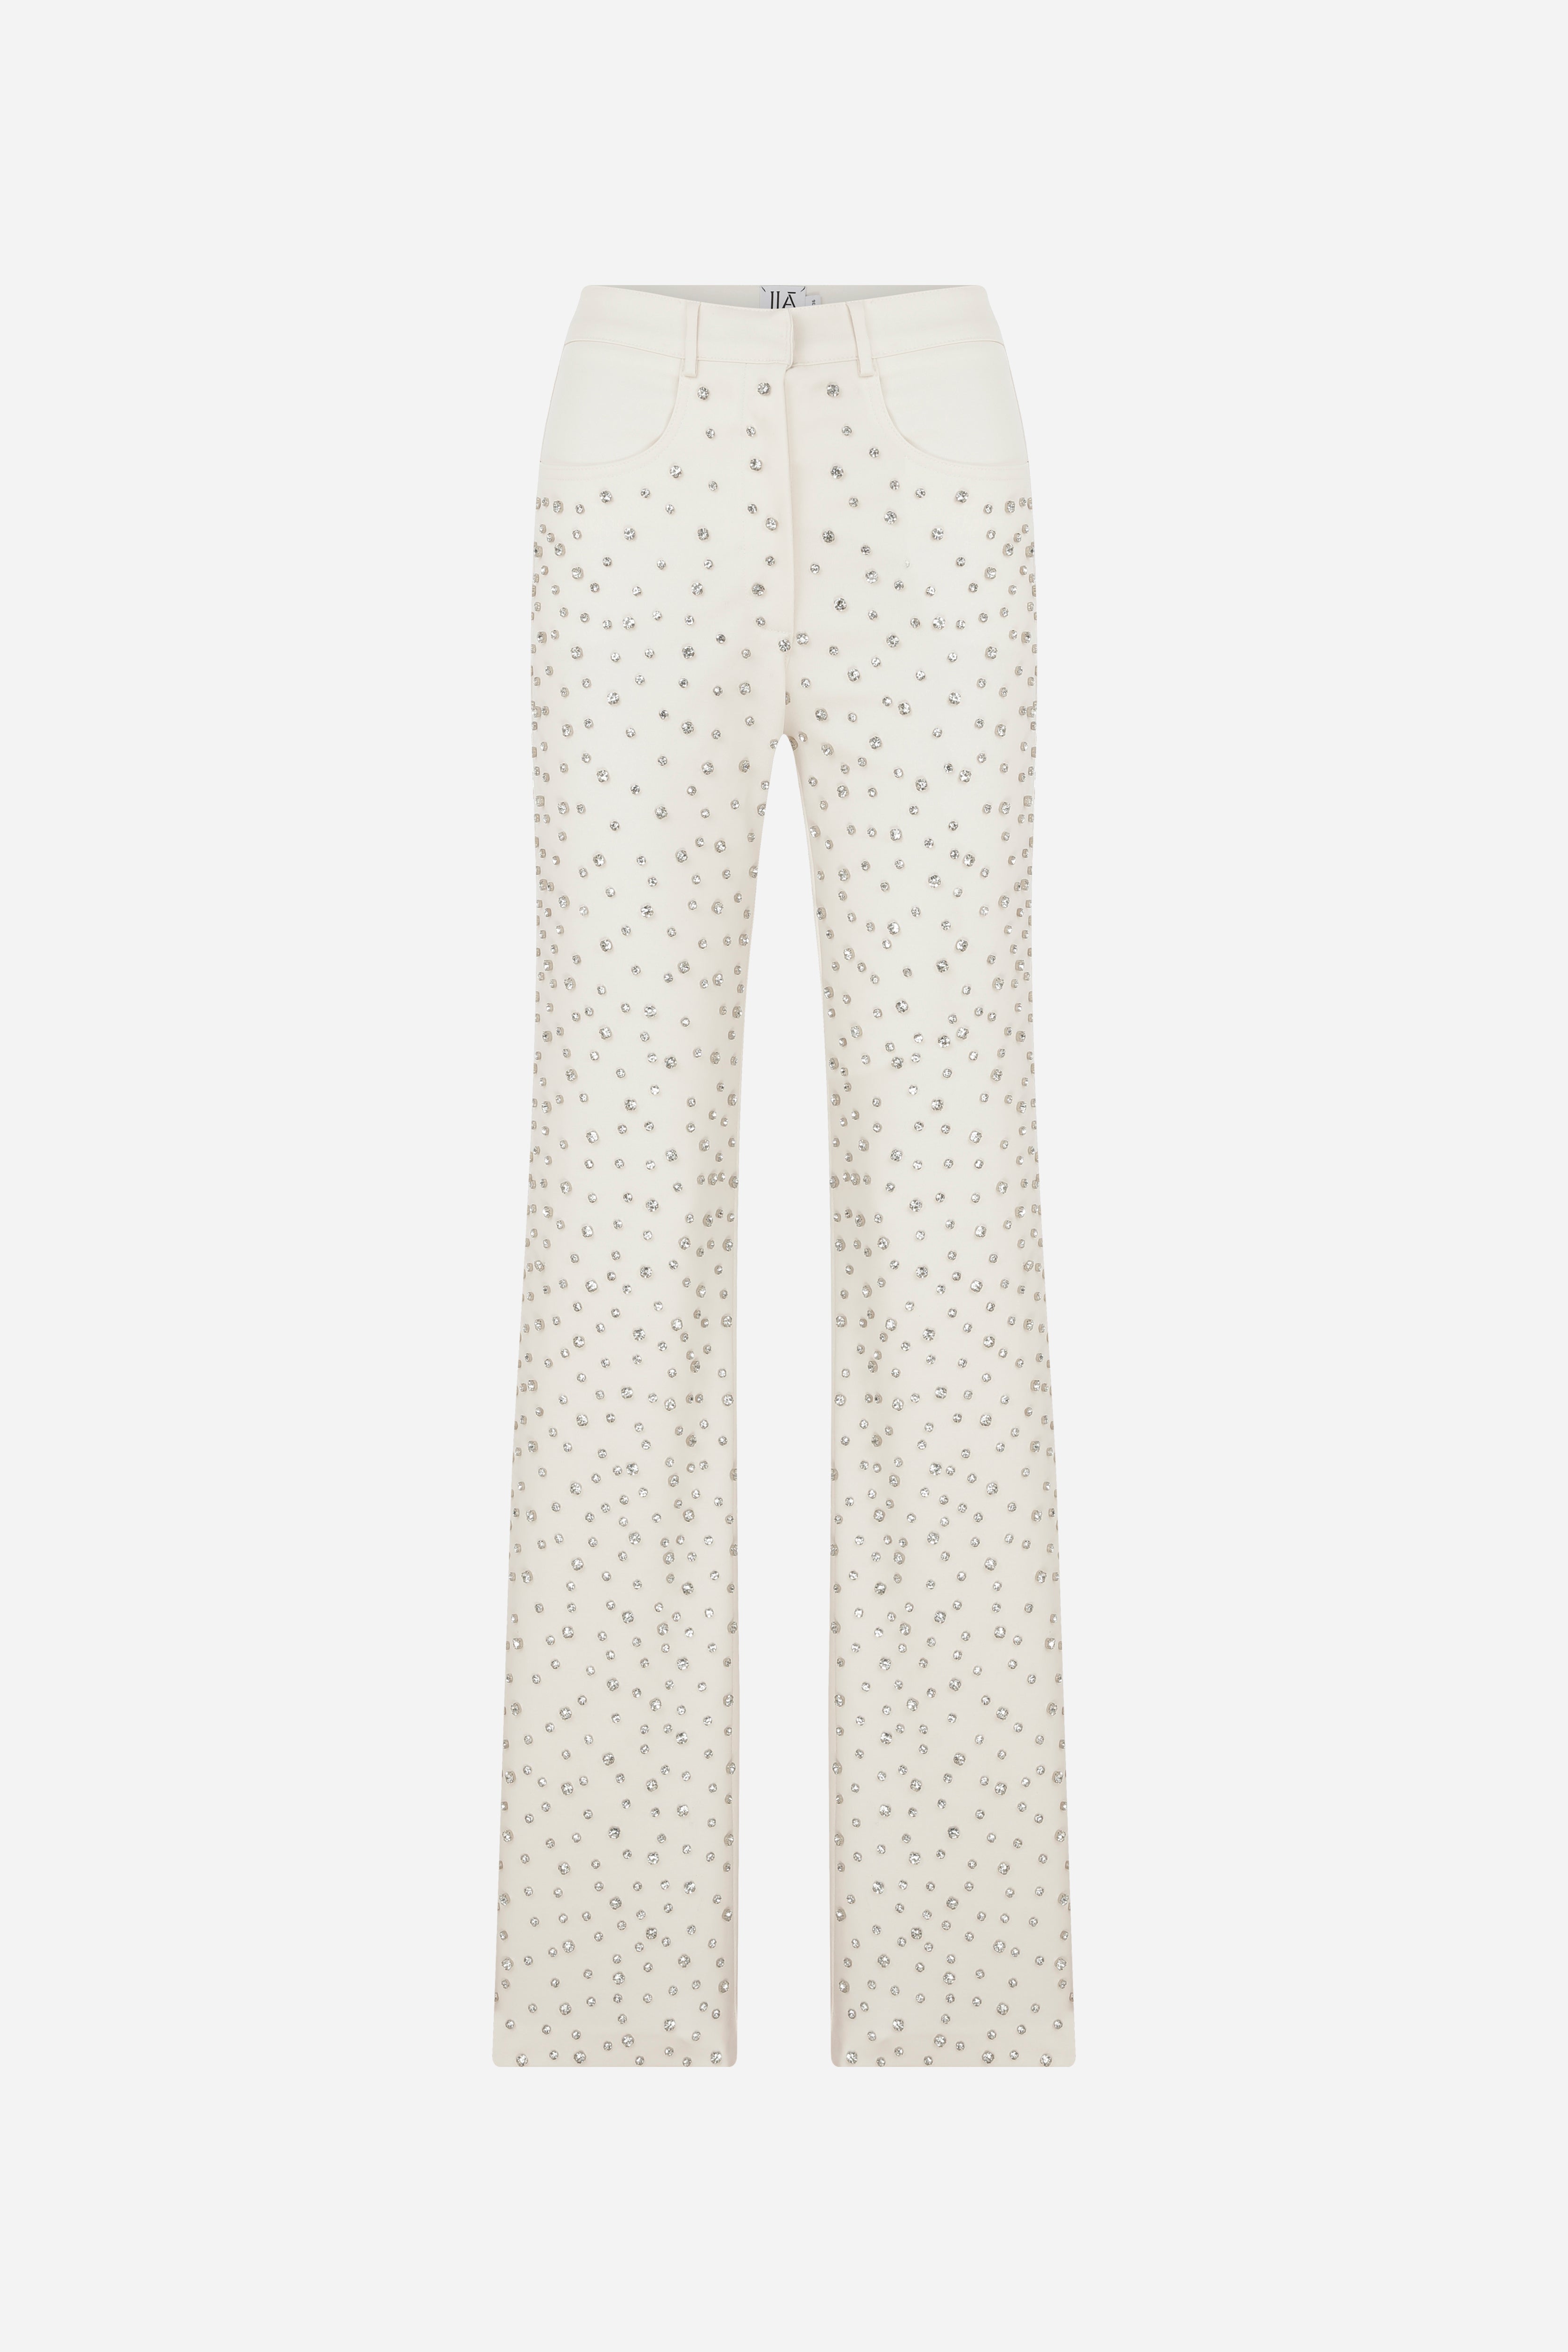 Mira - Embellished Trousers